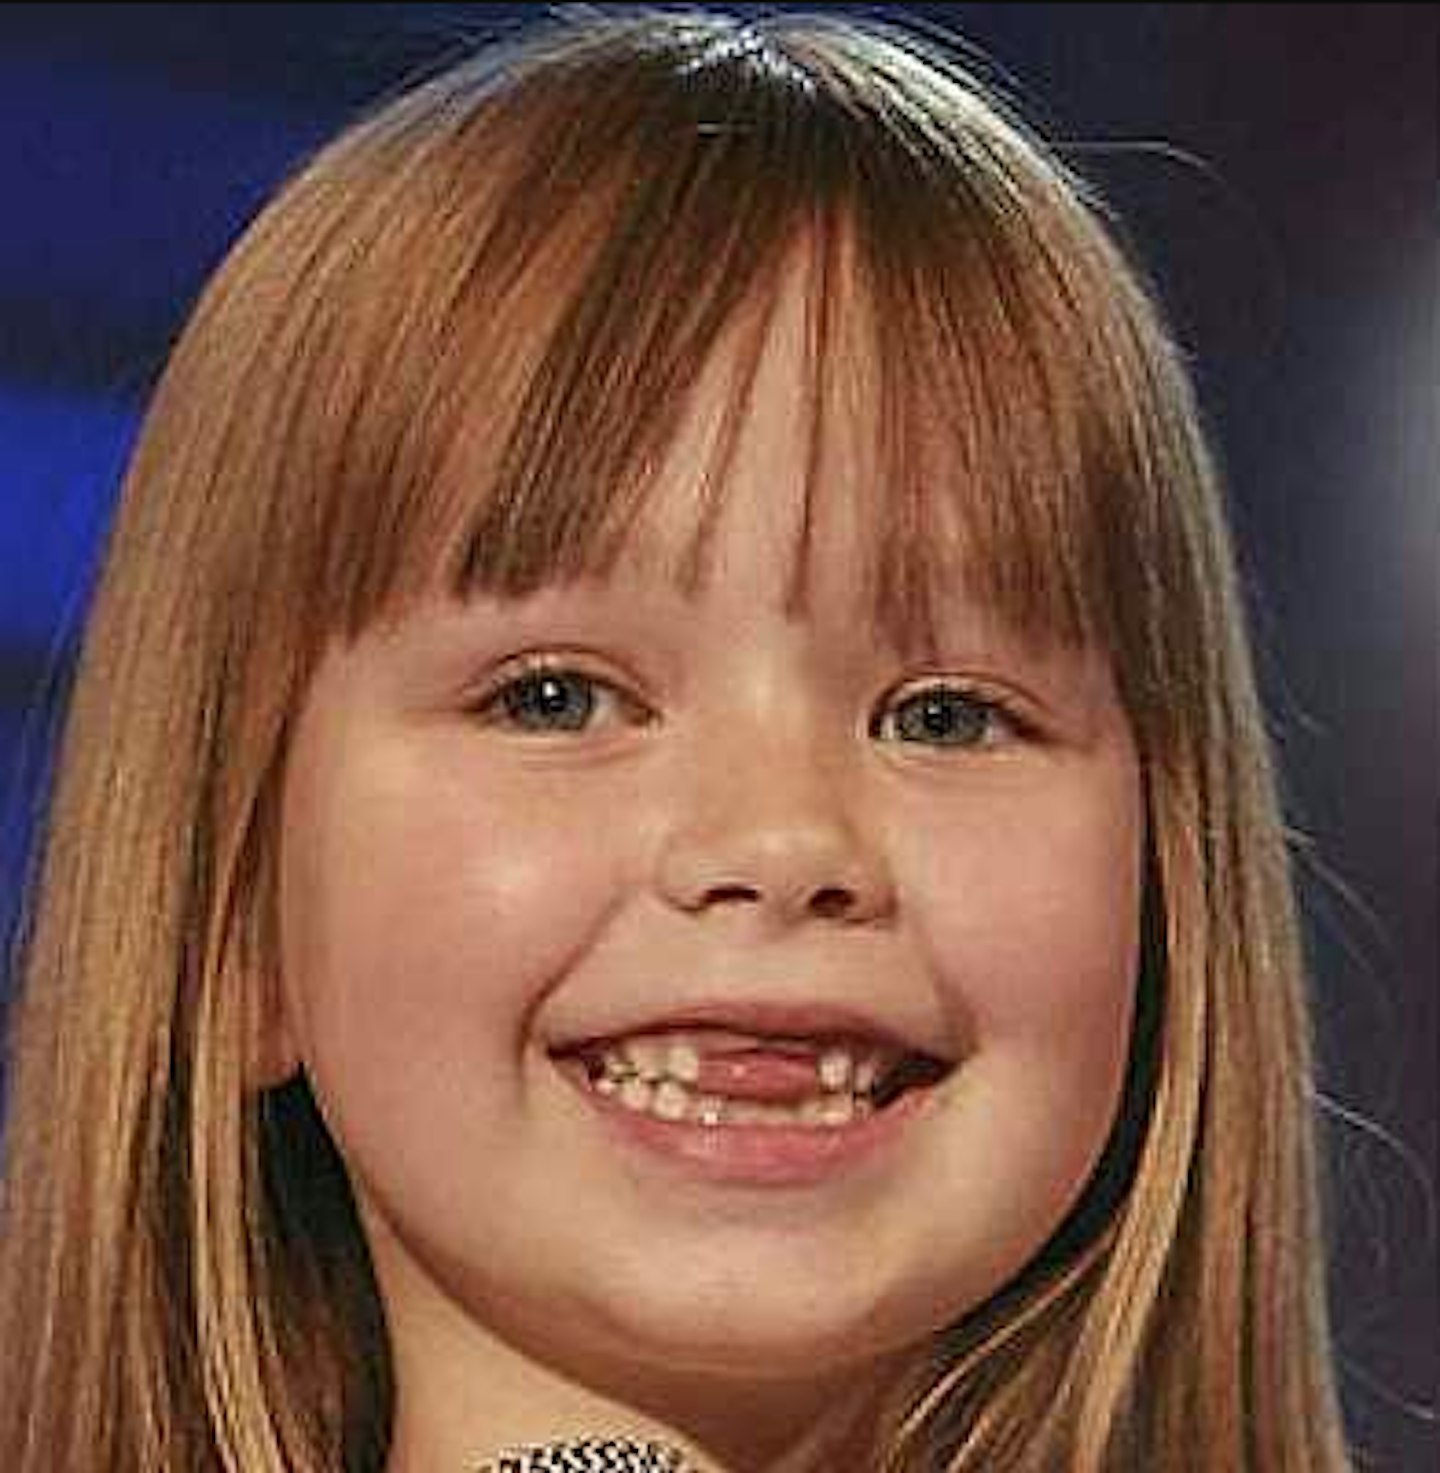 Connie Talbot credits Britain's Got Talent for giving her a career